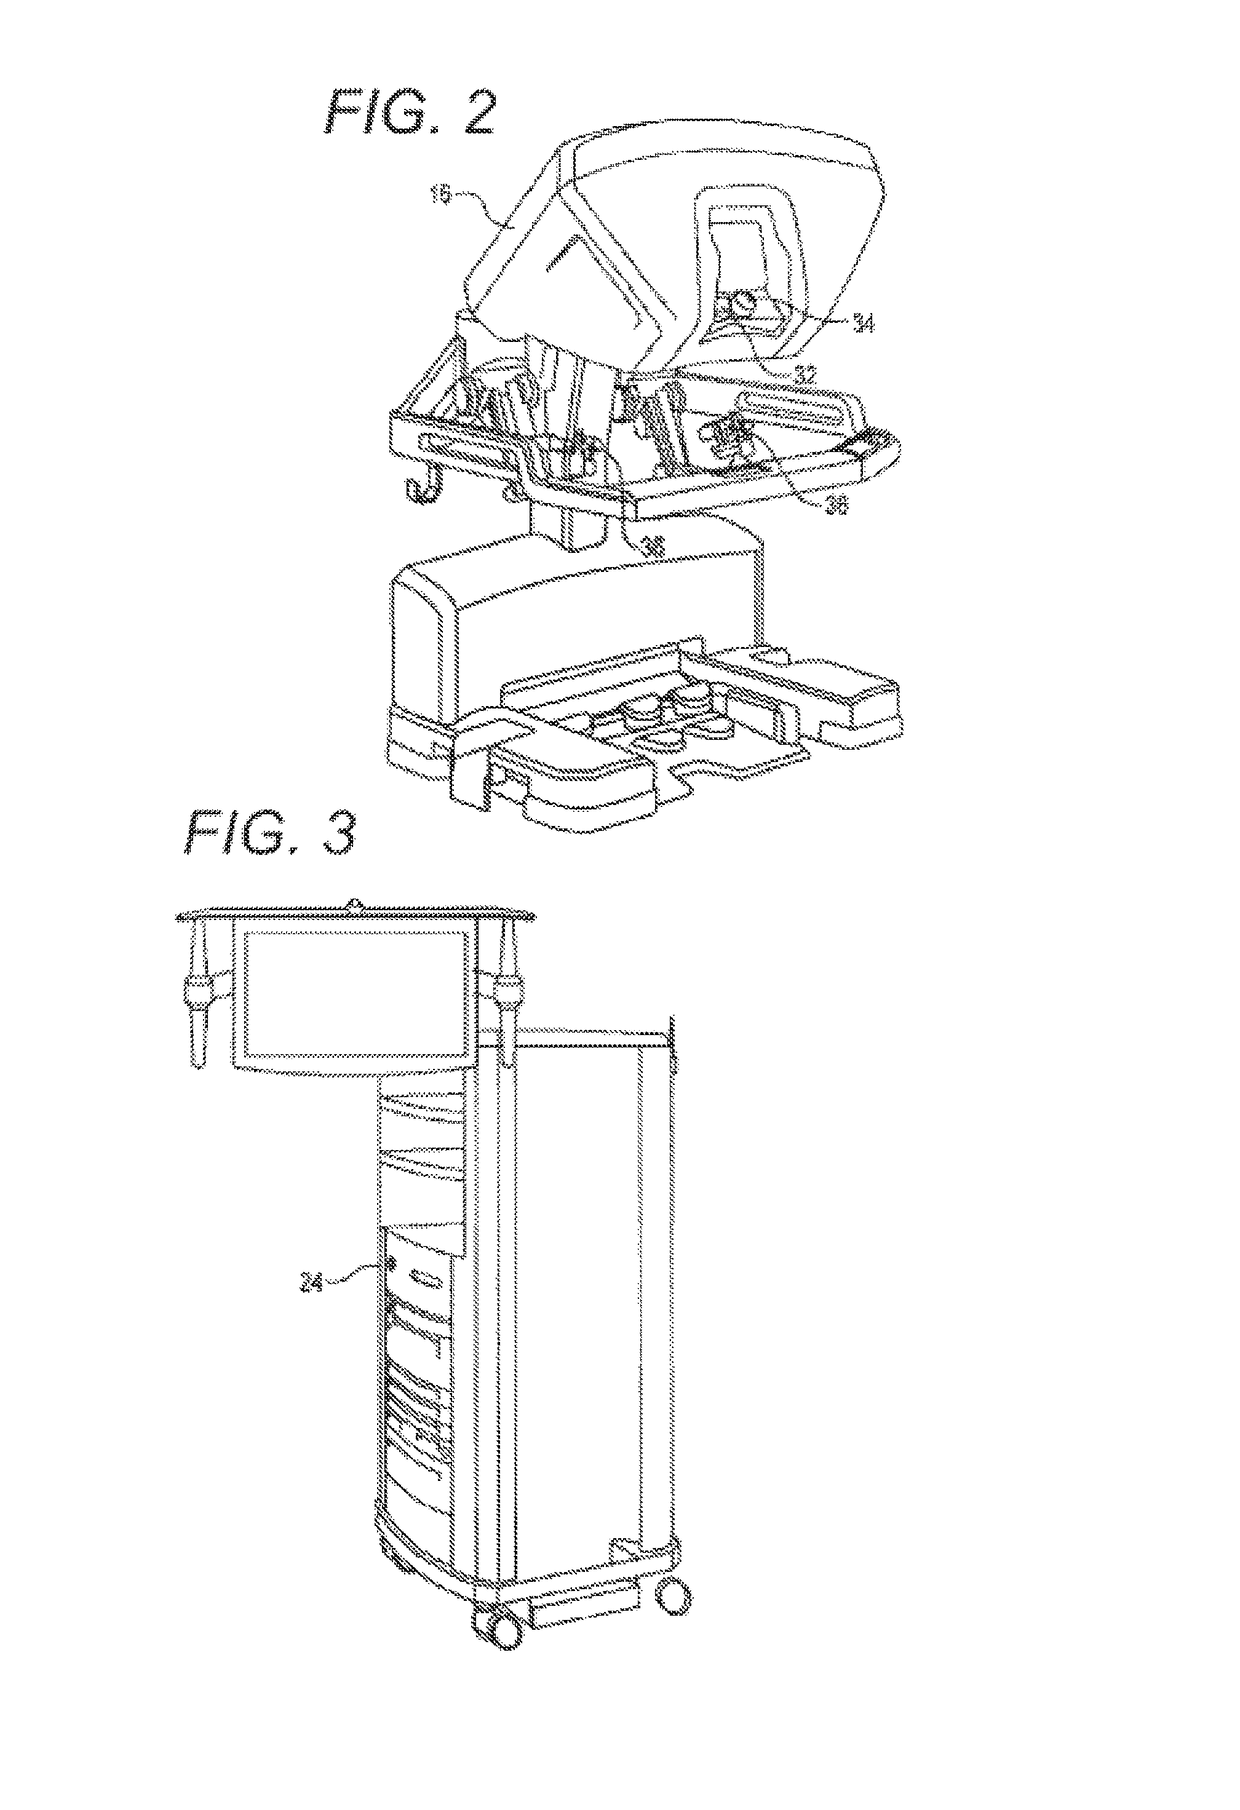 Active and semi-active damping in a telesurgical system